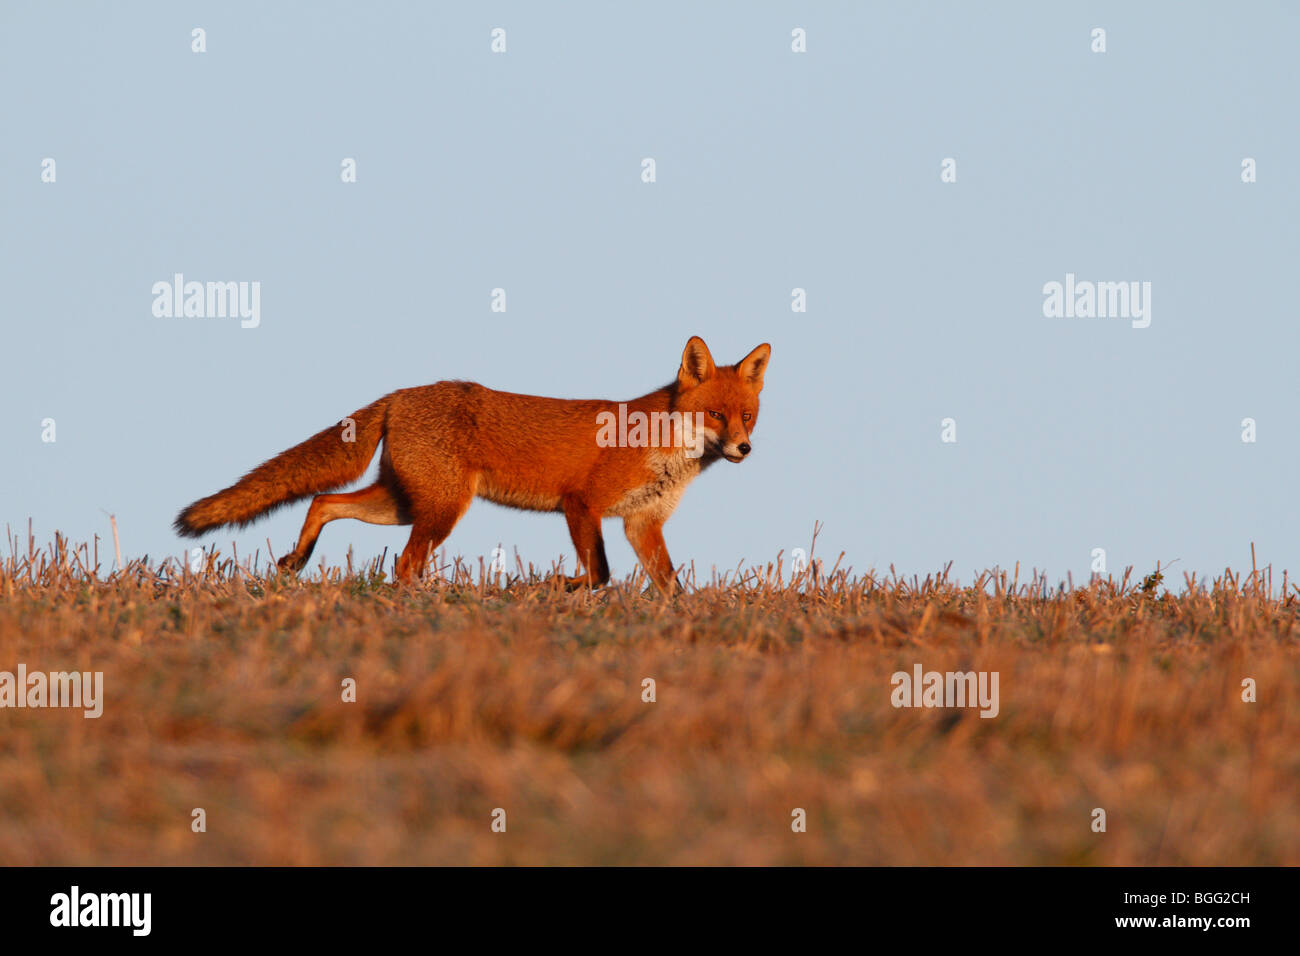 Le Renard roux Vulpes vulpes early morning light Banque D'Images